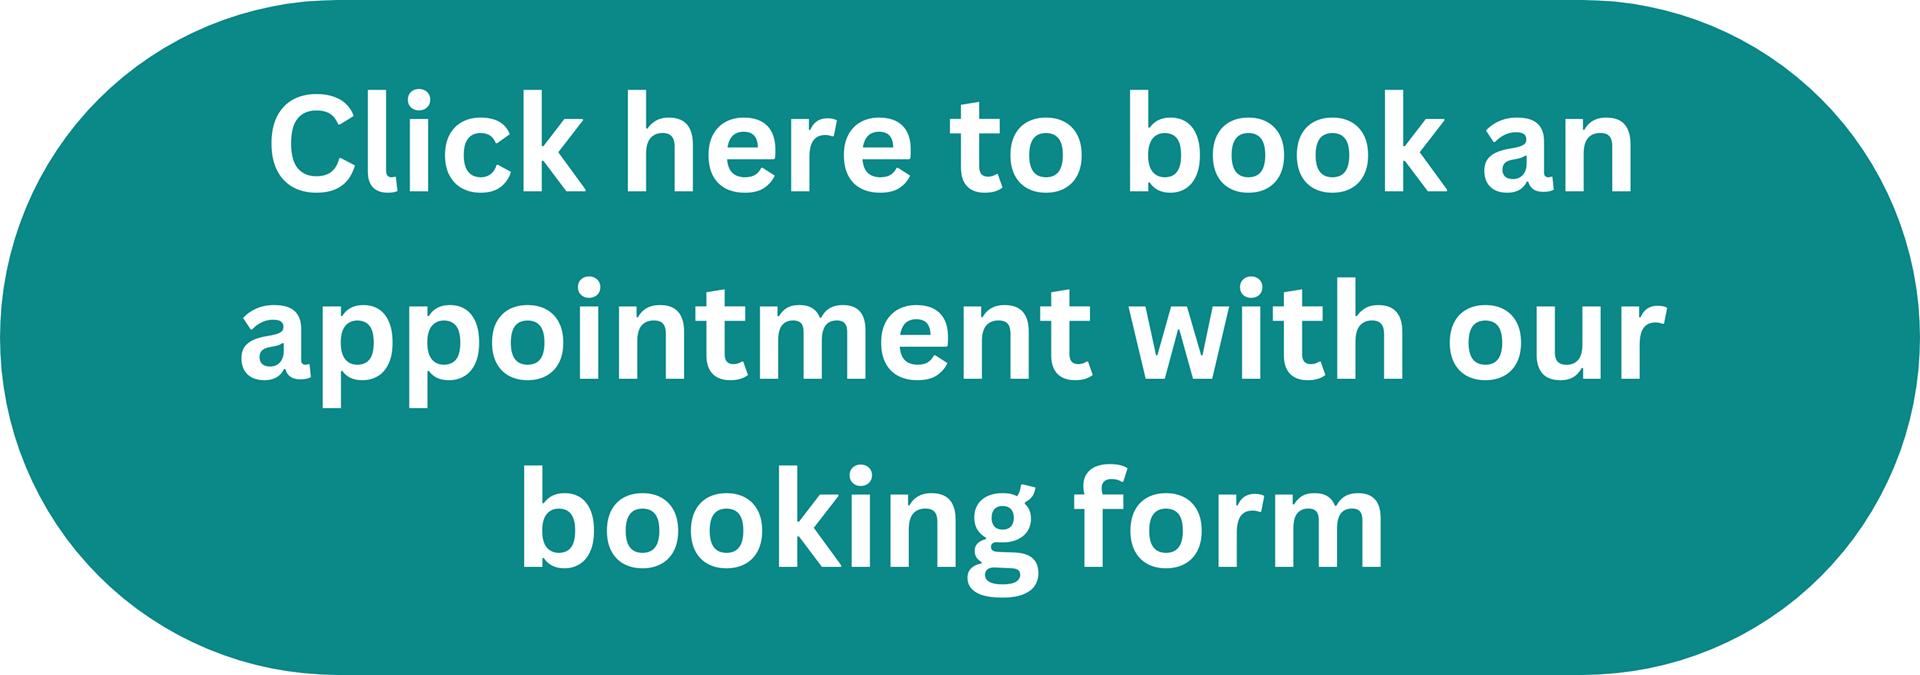 Click here to book an appointment with our booking form